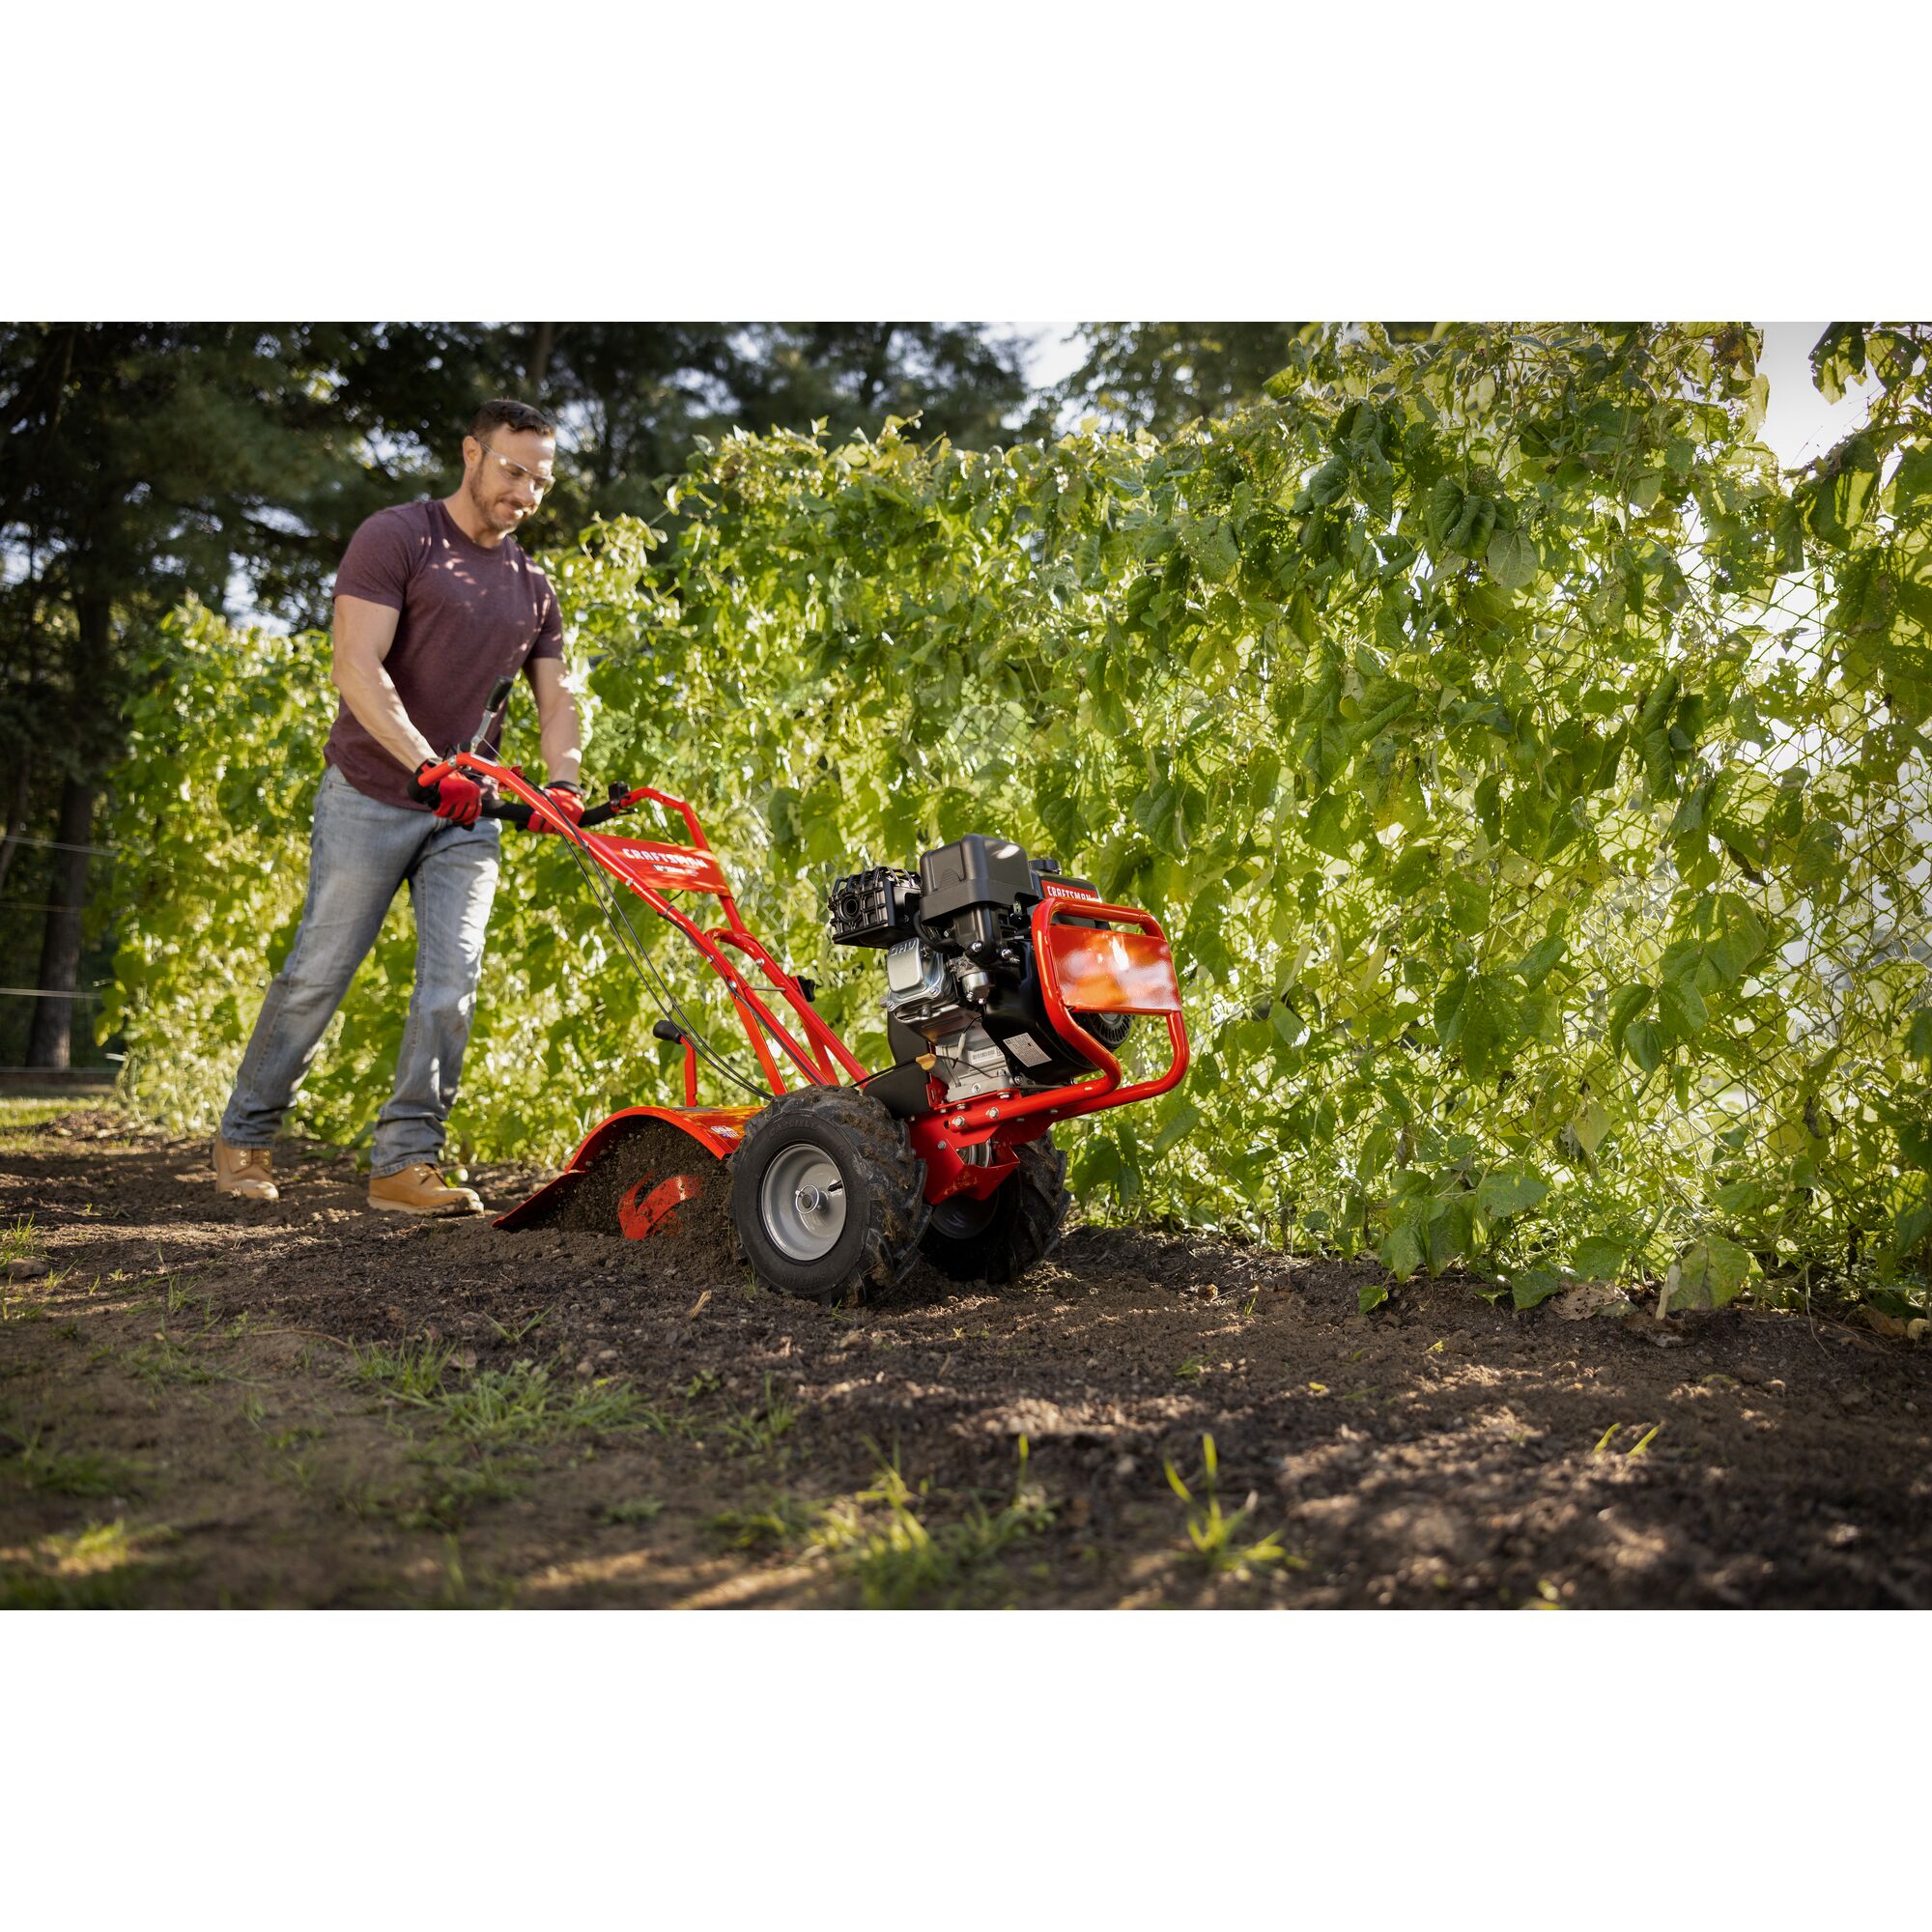 CRAFTSMAN 16-in. 208cc Gas Rear Tine Tiller tilling garden area with trees in background